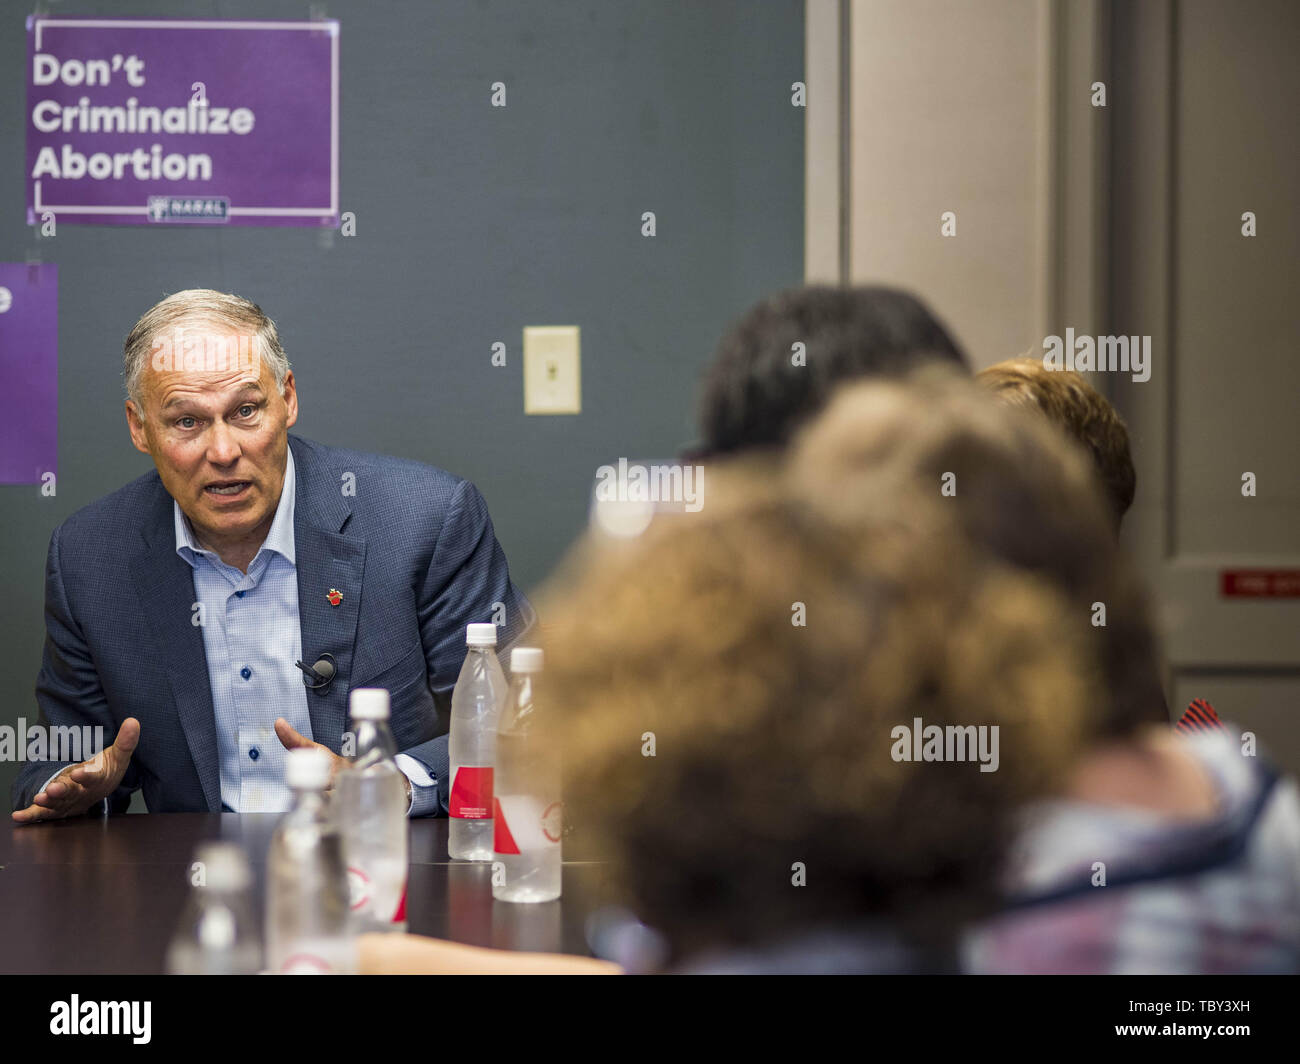 Des Moines, Iowa, USA. 3rd June, 2019. Governor JAY INSLEE (D-WA), at a NARAL event in Des Moines. Governor Inslee is running to be the Democratic candidate for the US Presidency in 2020, He talked to a group of NARAL supporters in Des Moines Monday morning and committed his support to a woman's rights to choose. Iowa traditionally hosts the the first election event of the presidential election cycle. The Iowa Caucuses will be on Feb. 3, 2020. Credit: Jack Kurtz/ZUMA Wire/Alamy Live News Stock Photo